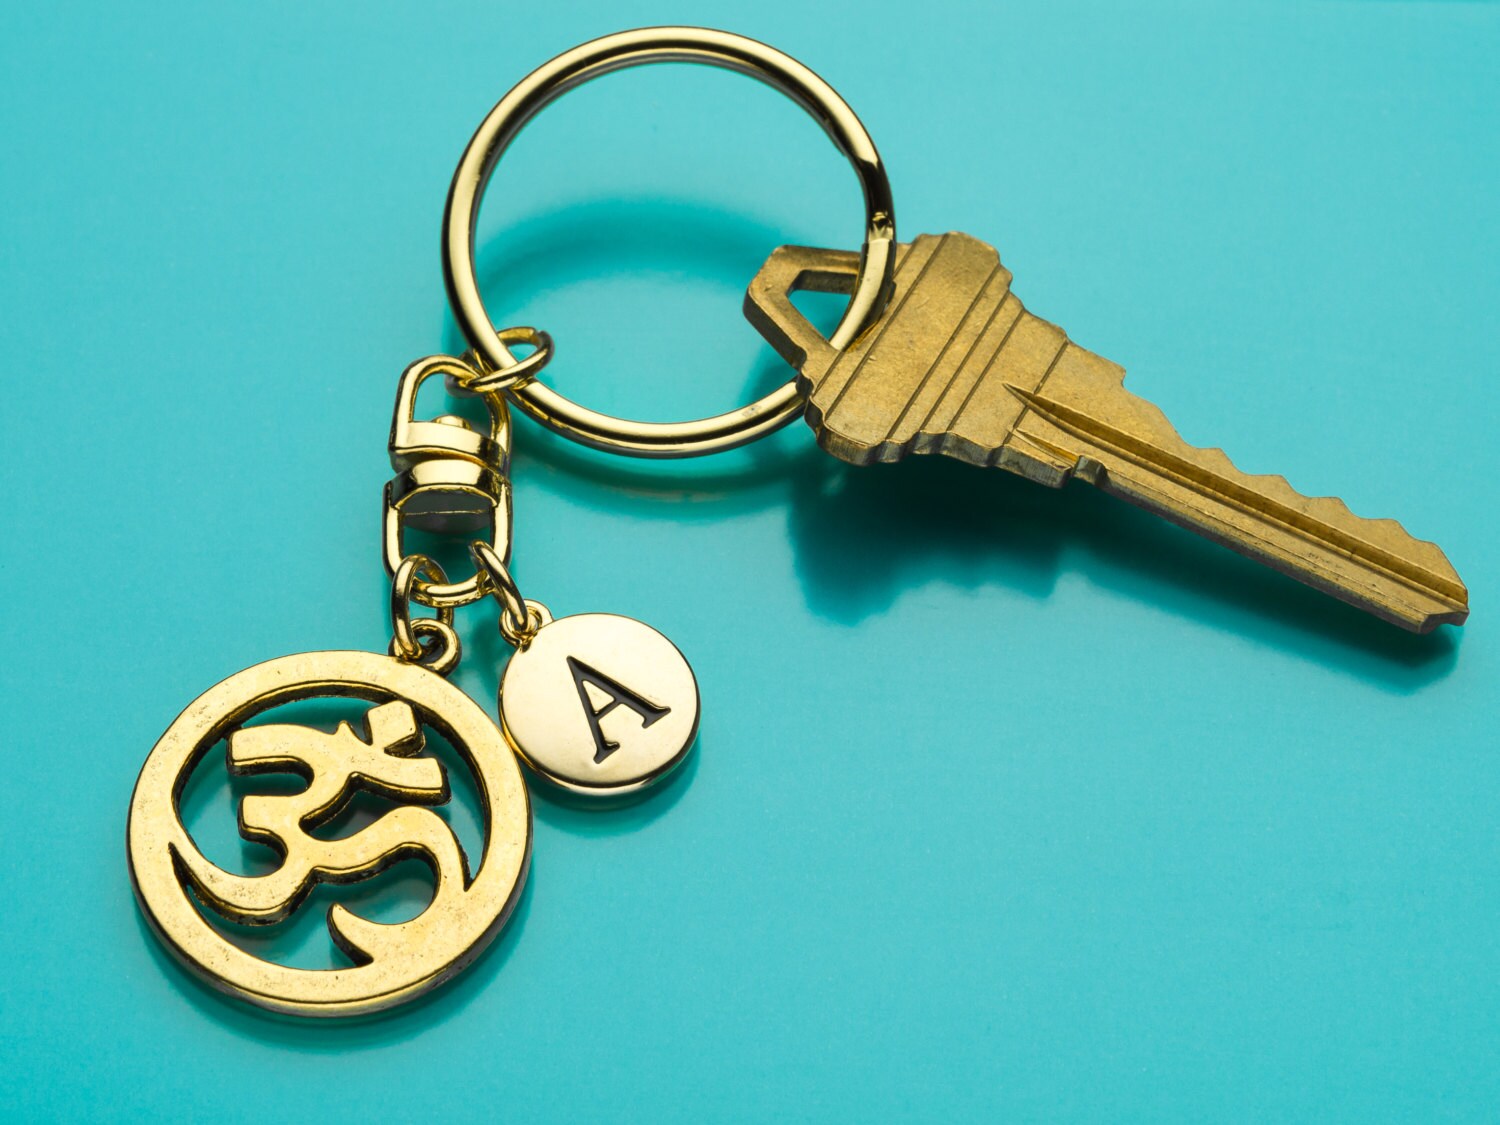 Yoga OM Symbol Key Ring Shell Stainless Steel Silver Color Buddhist Indian  Hindu Amulet Keychain Jewelry porte clef femme